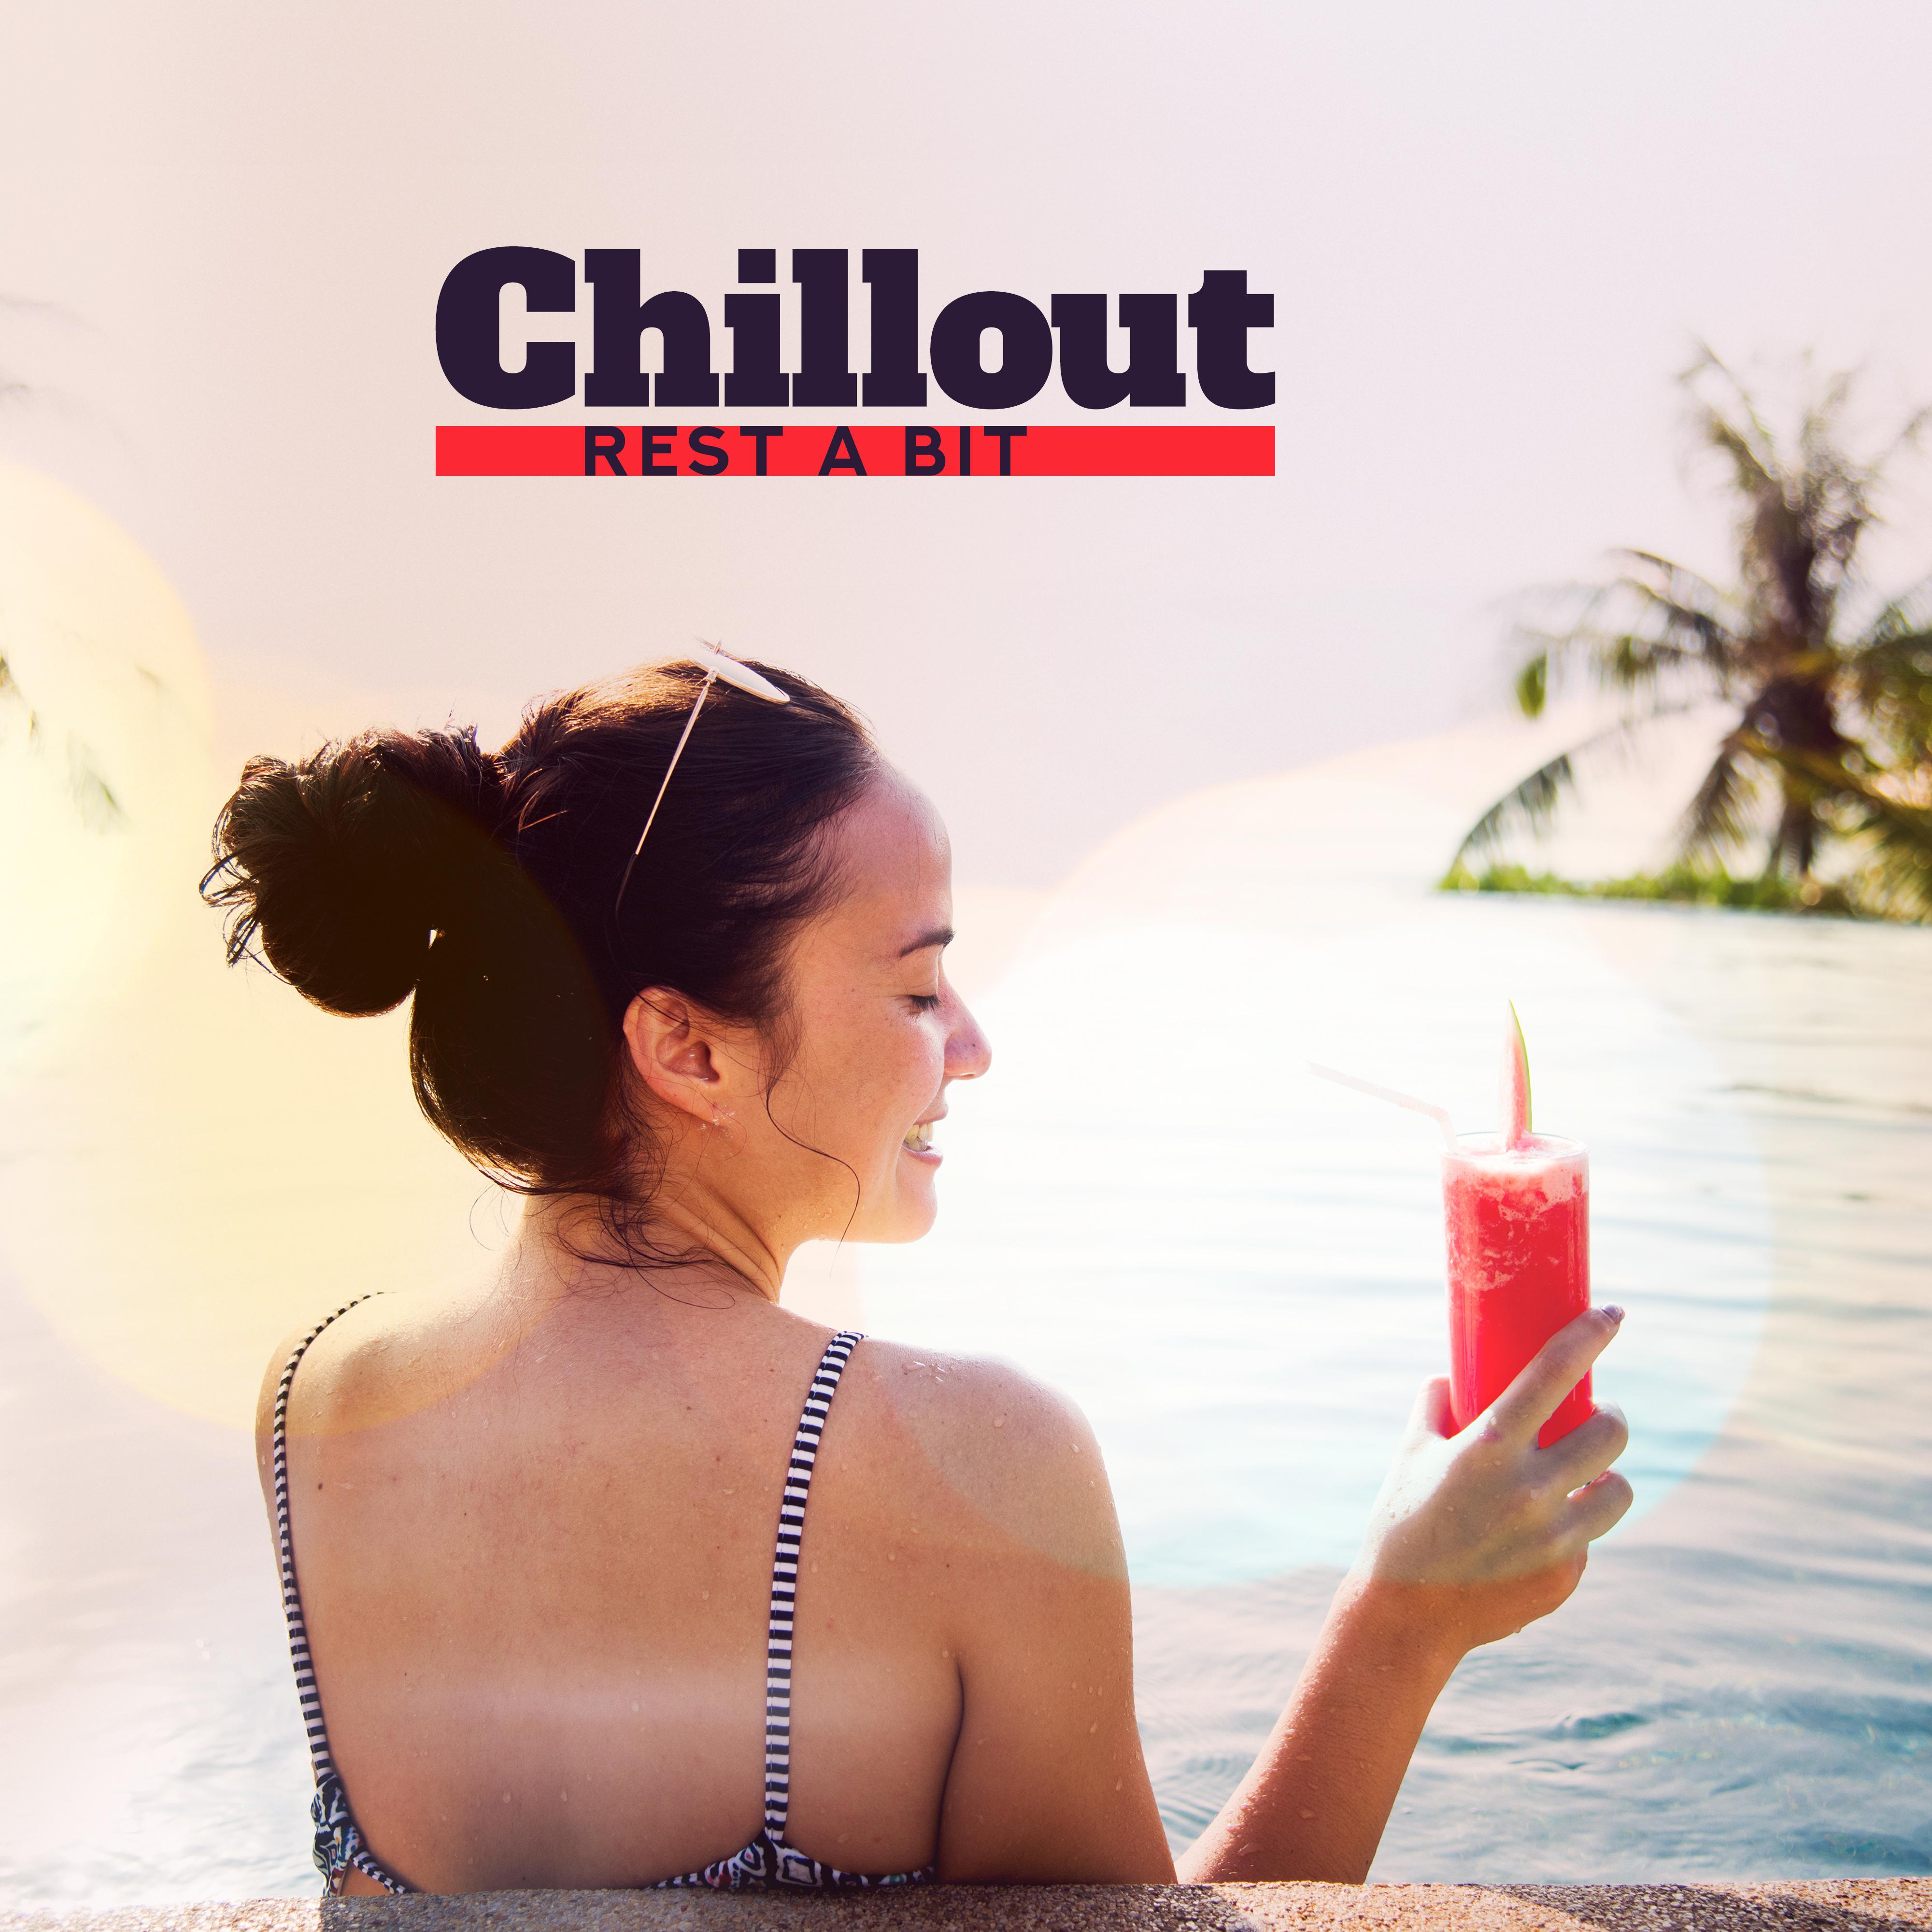 Chillout Rest a Bit: 2019 Relaxing Beach Vibes, Electronic Smooth Beats, Stress Relief Melodies